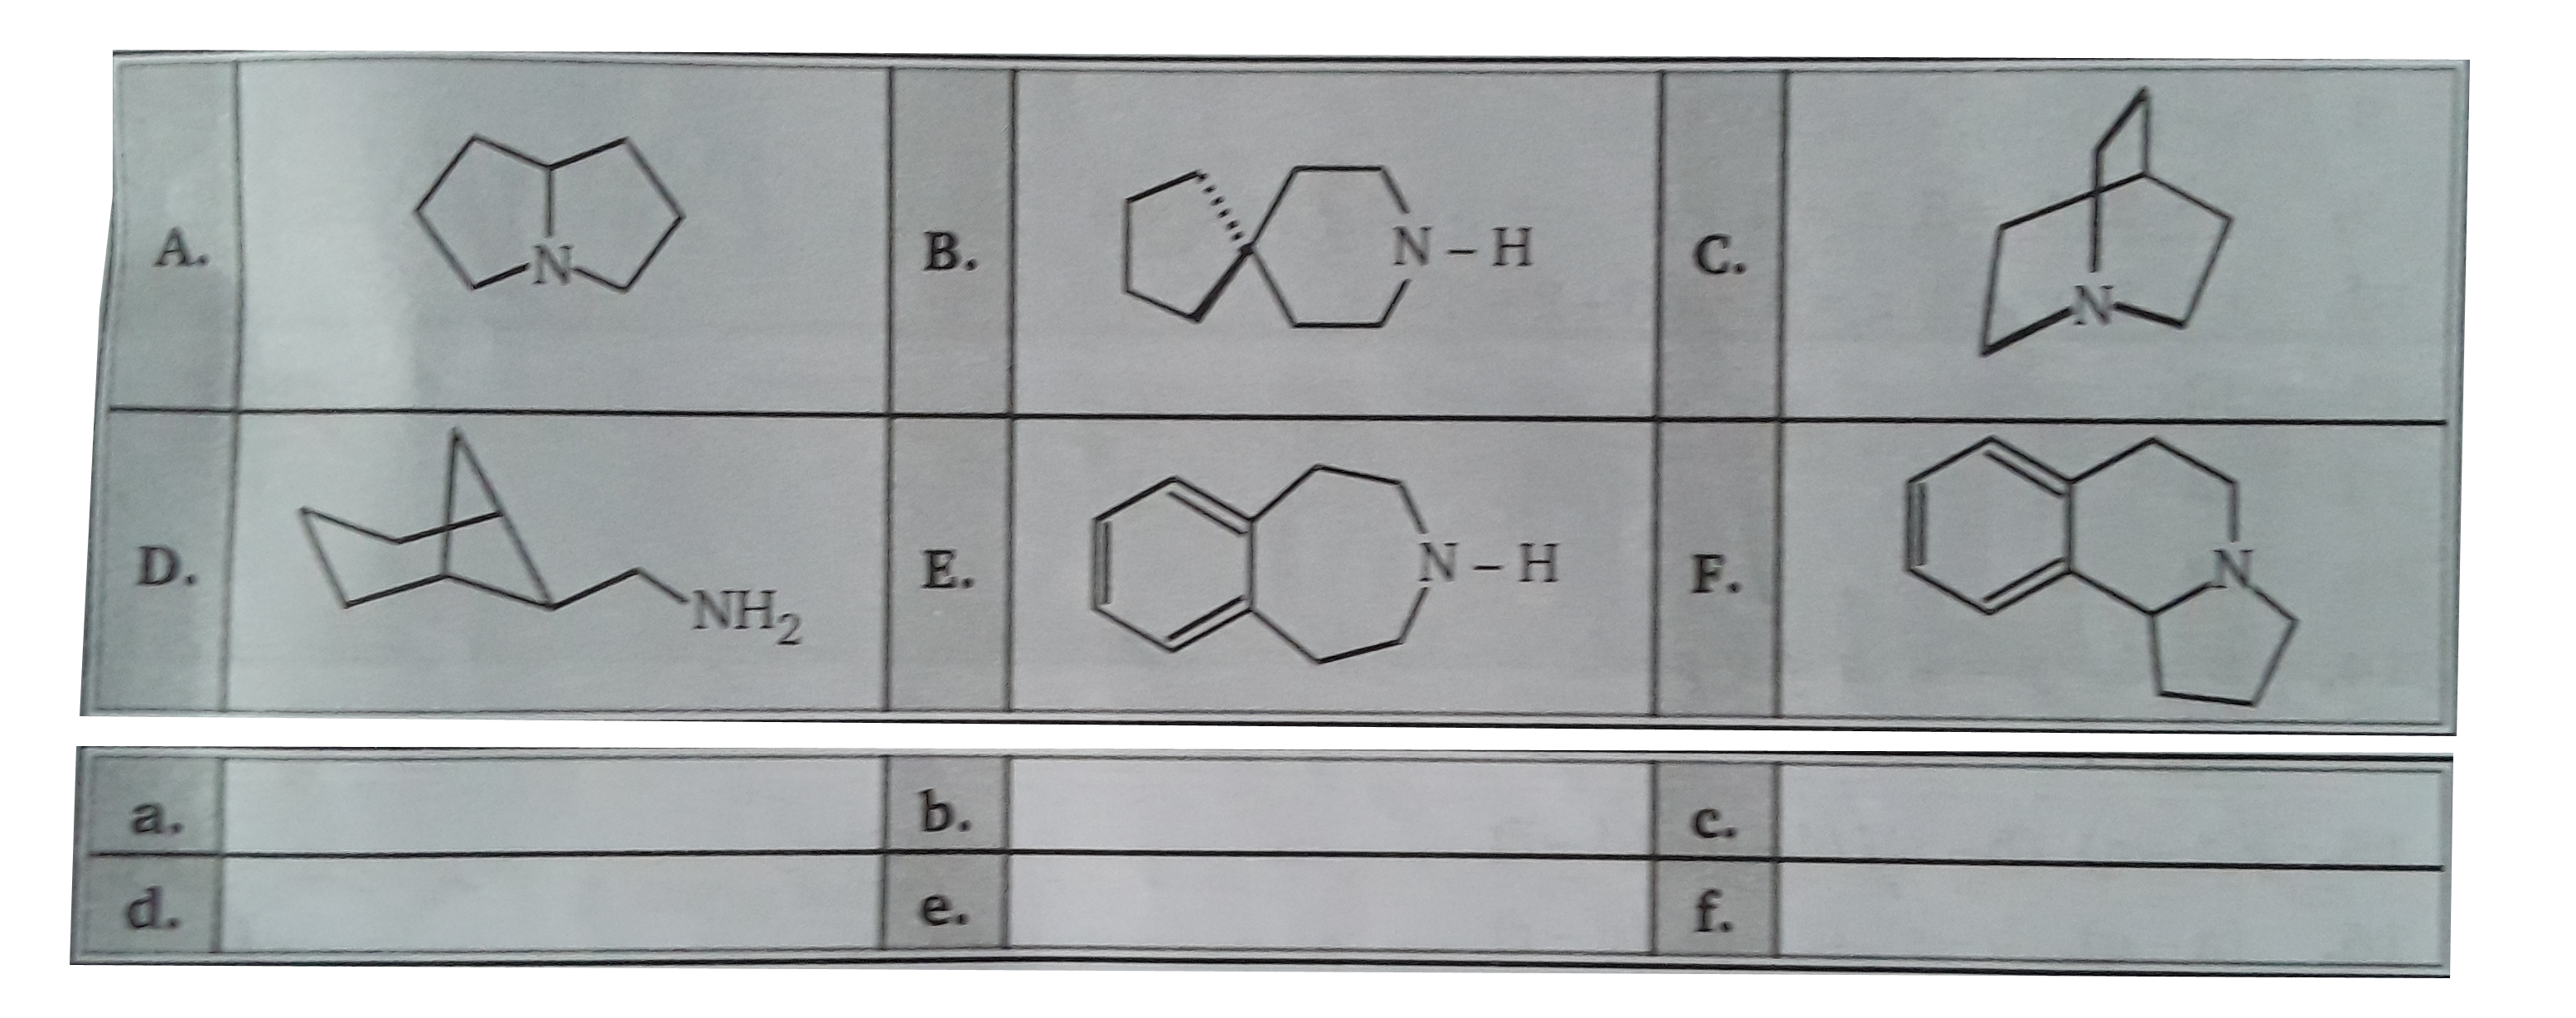 For each the following amines (a though D) ,Exhaustive methylation (treatment with excess mrthy iosdile ) folloeing by hoffmann elimination (heating with AgOH) ,repesated as necssary , removes the niotrogen atomin the form to reamove the ntirogen aatom in the form of trmethylamine .In dicatte the number of respetivet Hoffmann eliinataion required toi reamove the nitrogen by a number (1to 4) in the desihnsataead answer sheet .